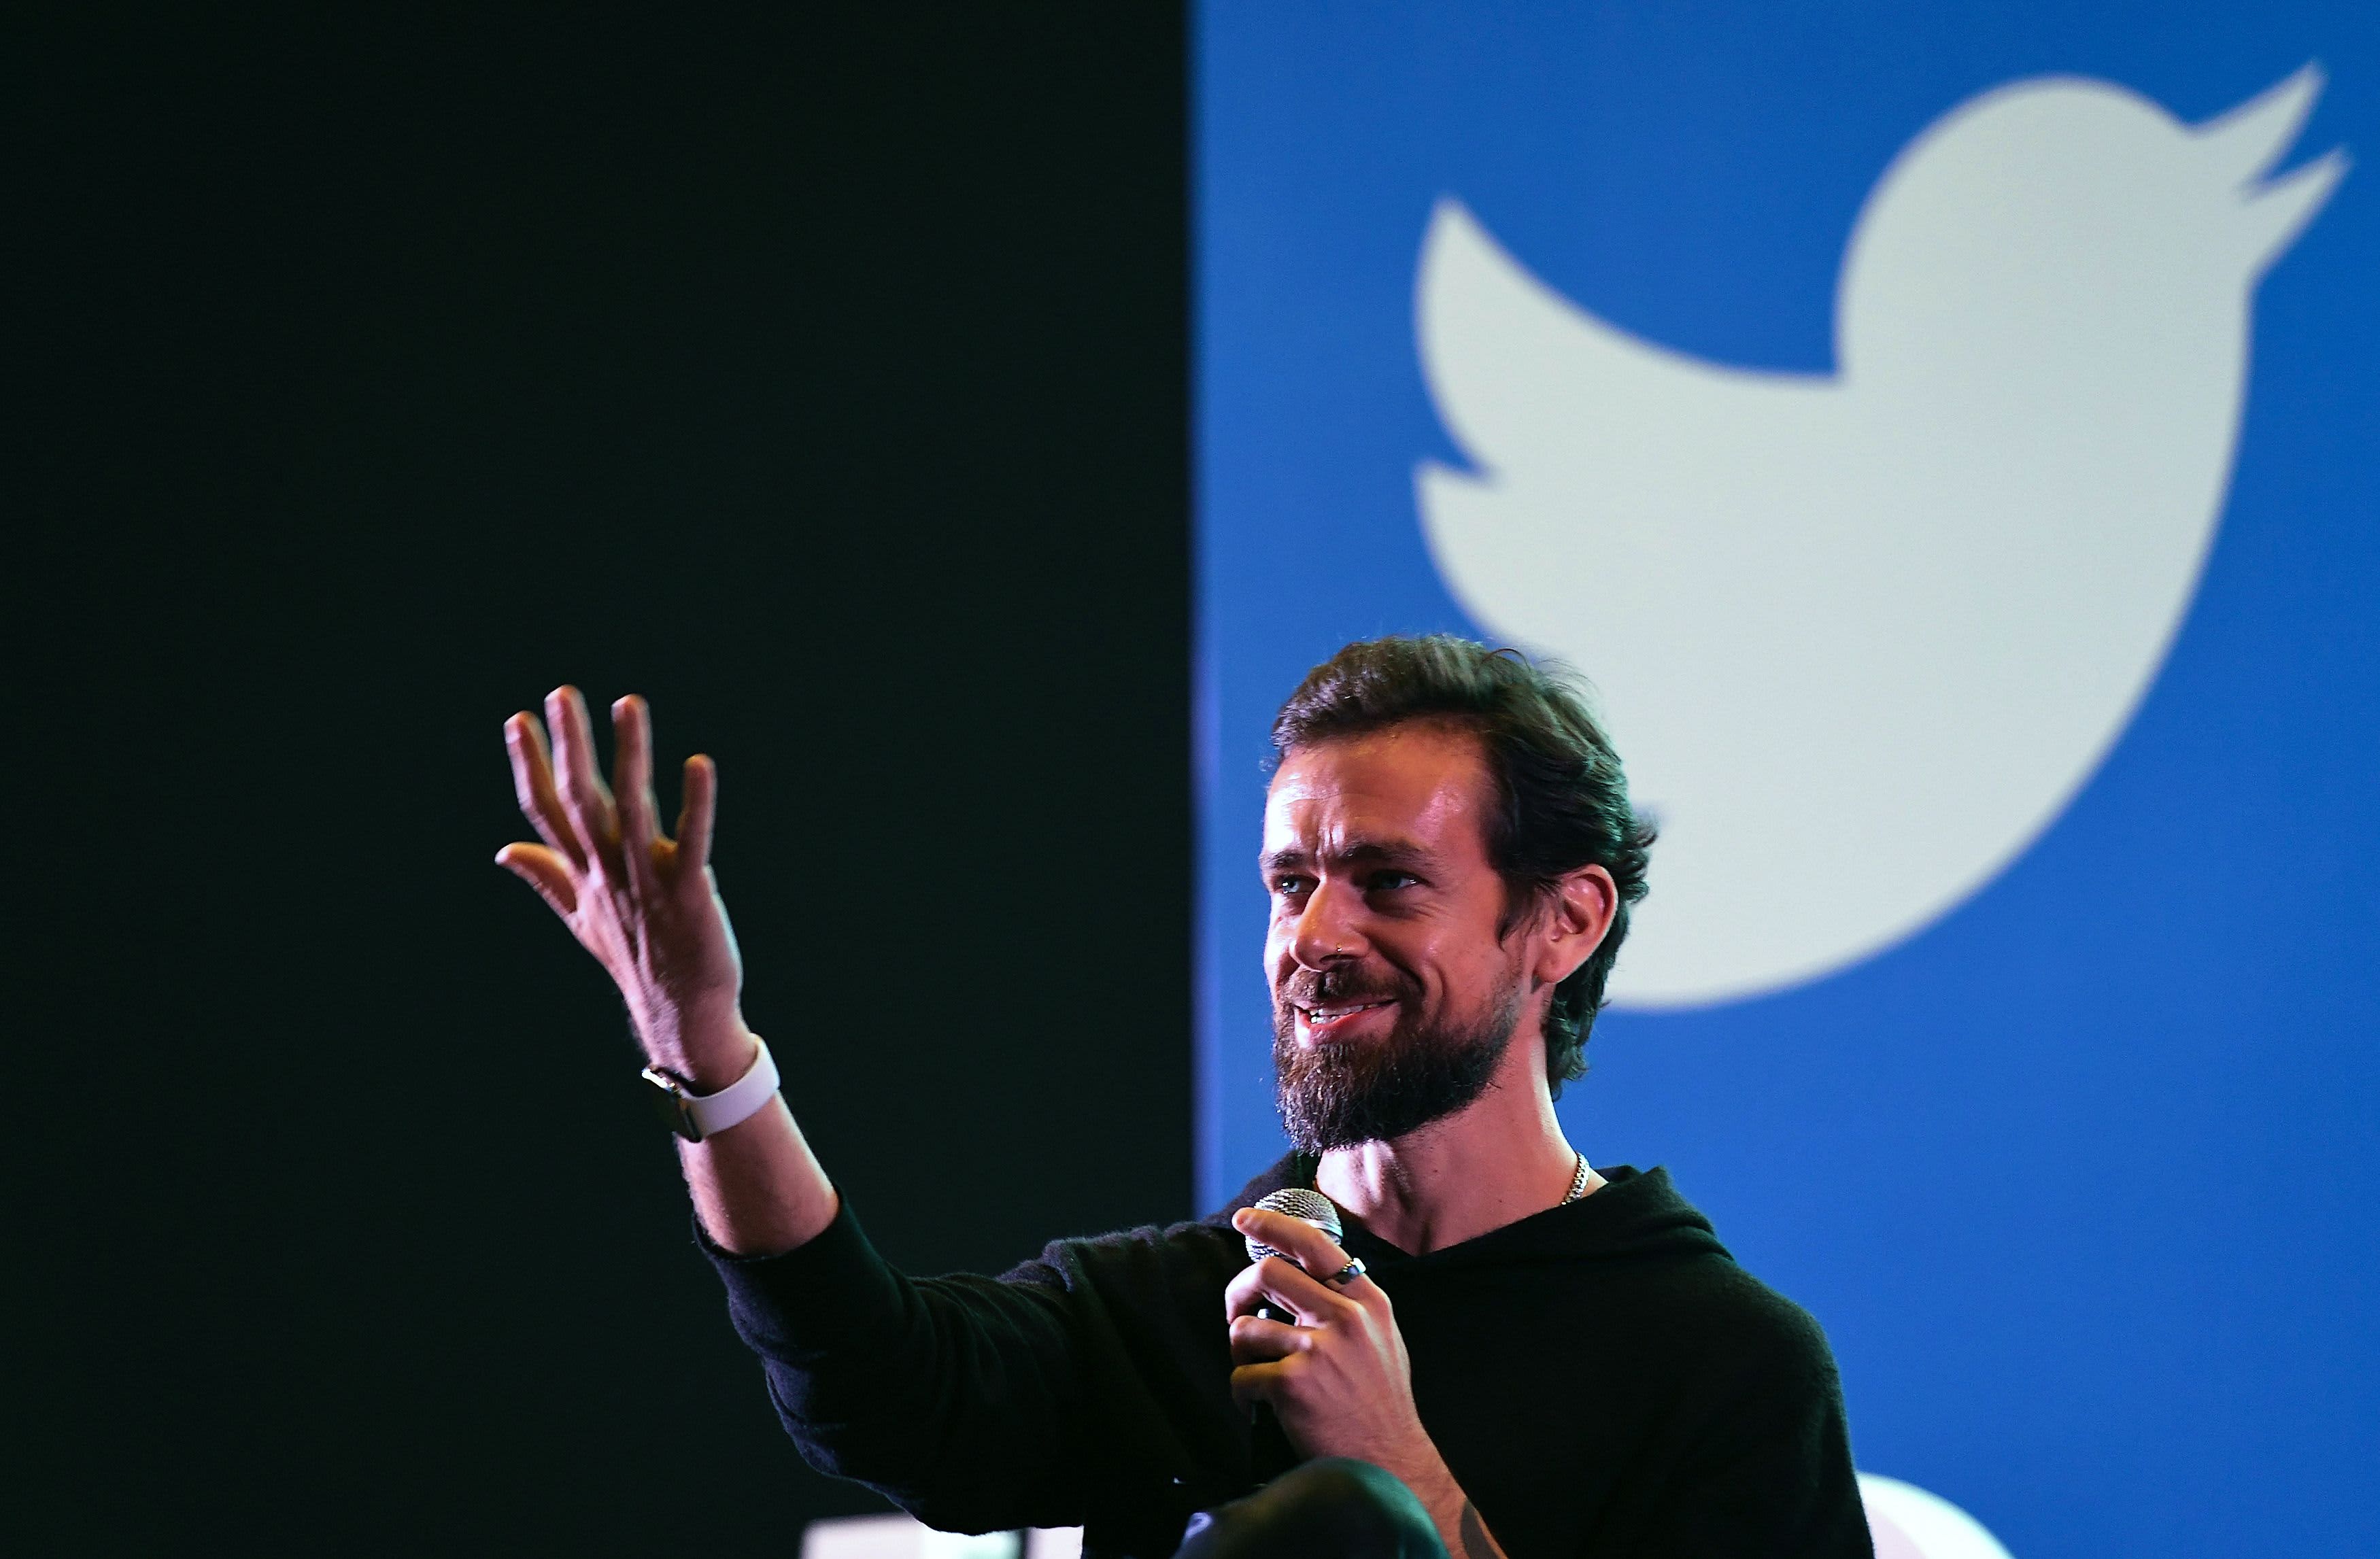 Jack Dorsey sells his first tweet ever as an NFT for over $ 2.9 million